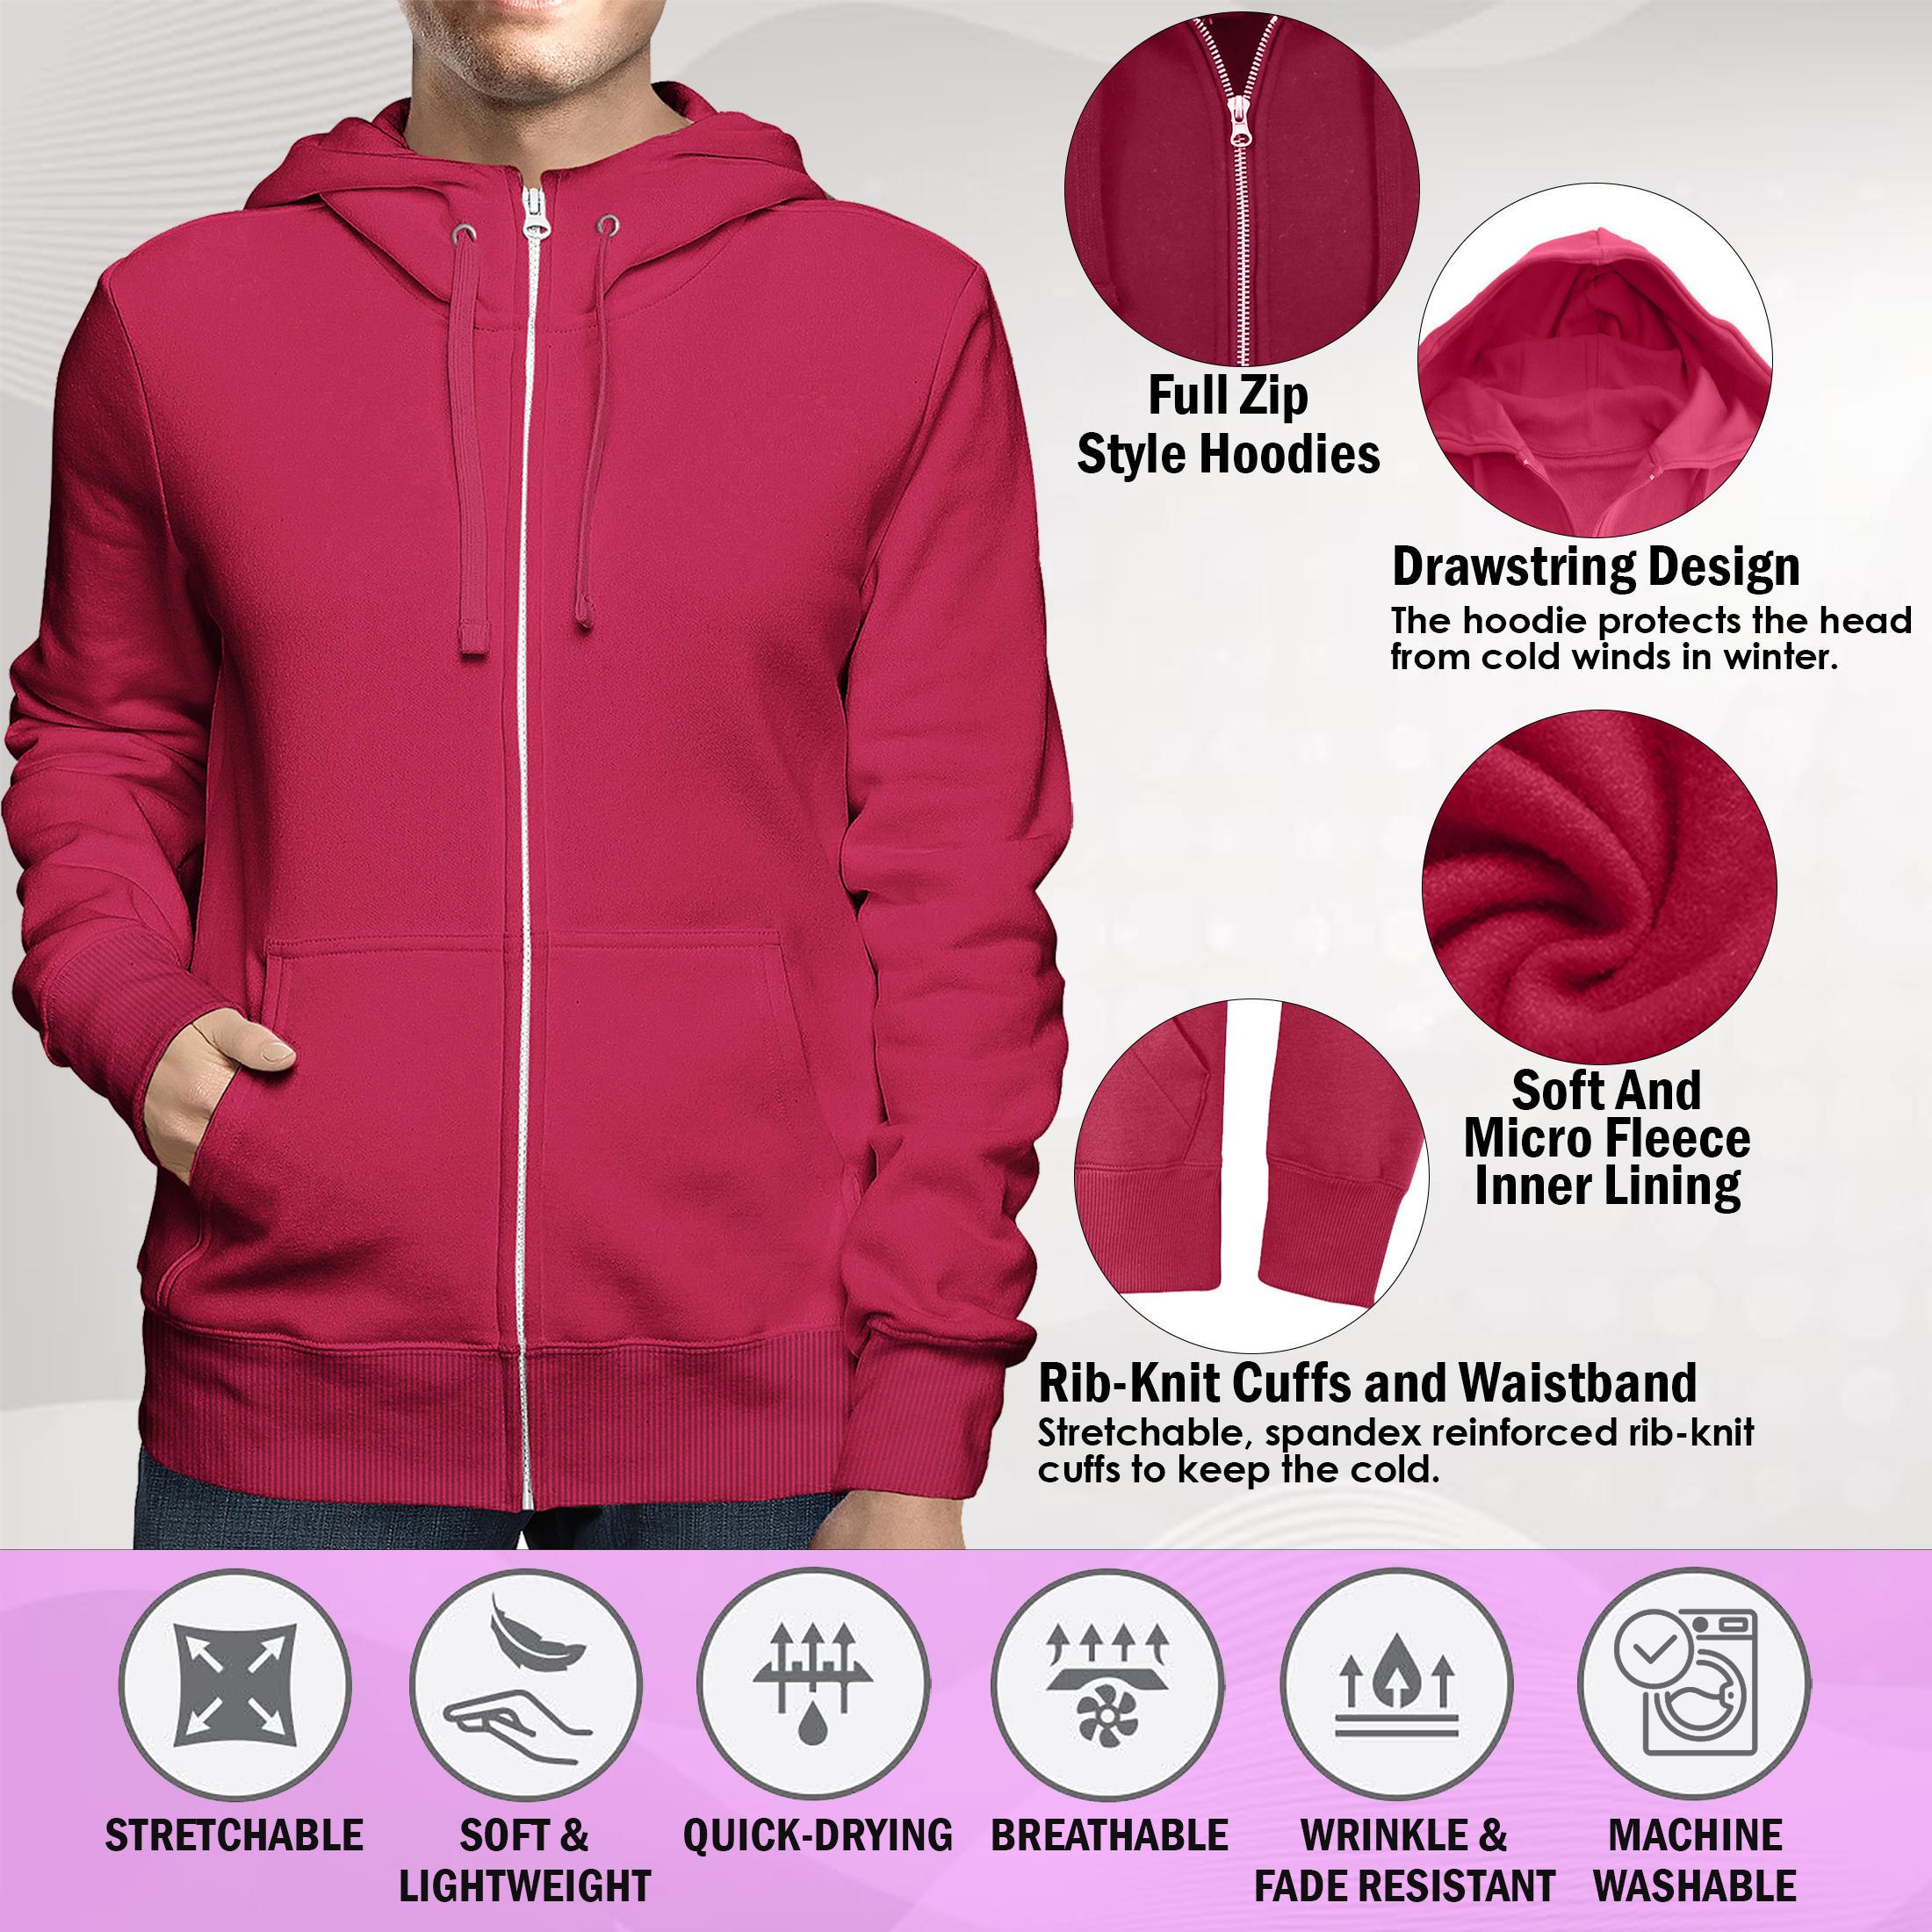 2-Pack: Men's Full Zip Up Fleece-Lined Hoodie Sweatshirt (Big & Tall Size Available) - Burgundy & Timberland, 2x-large